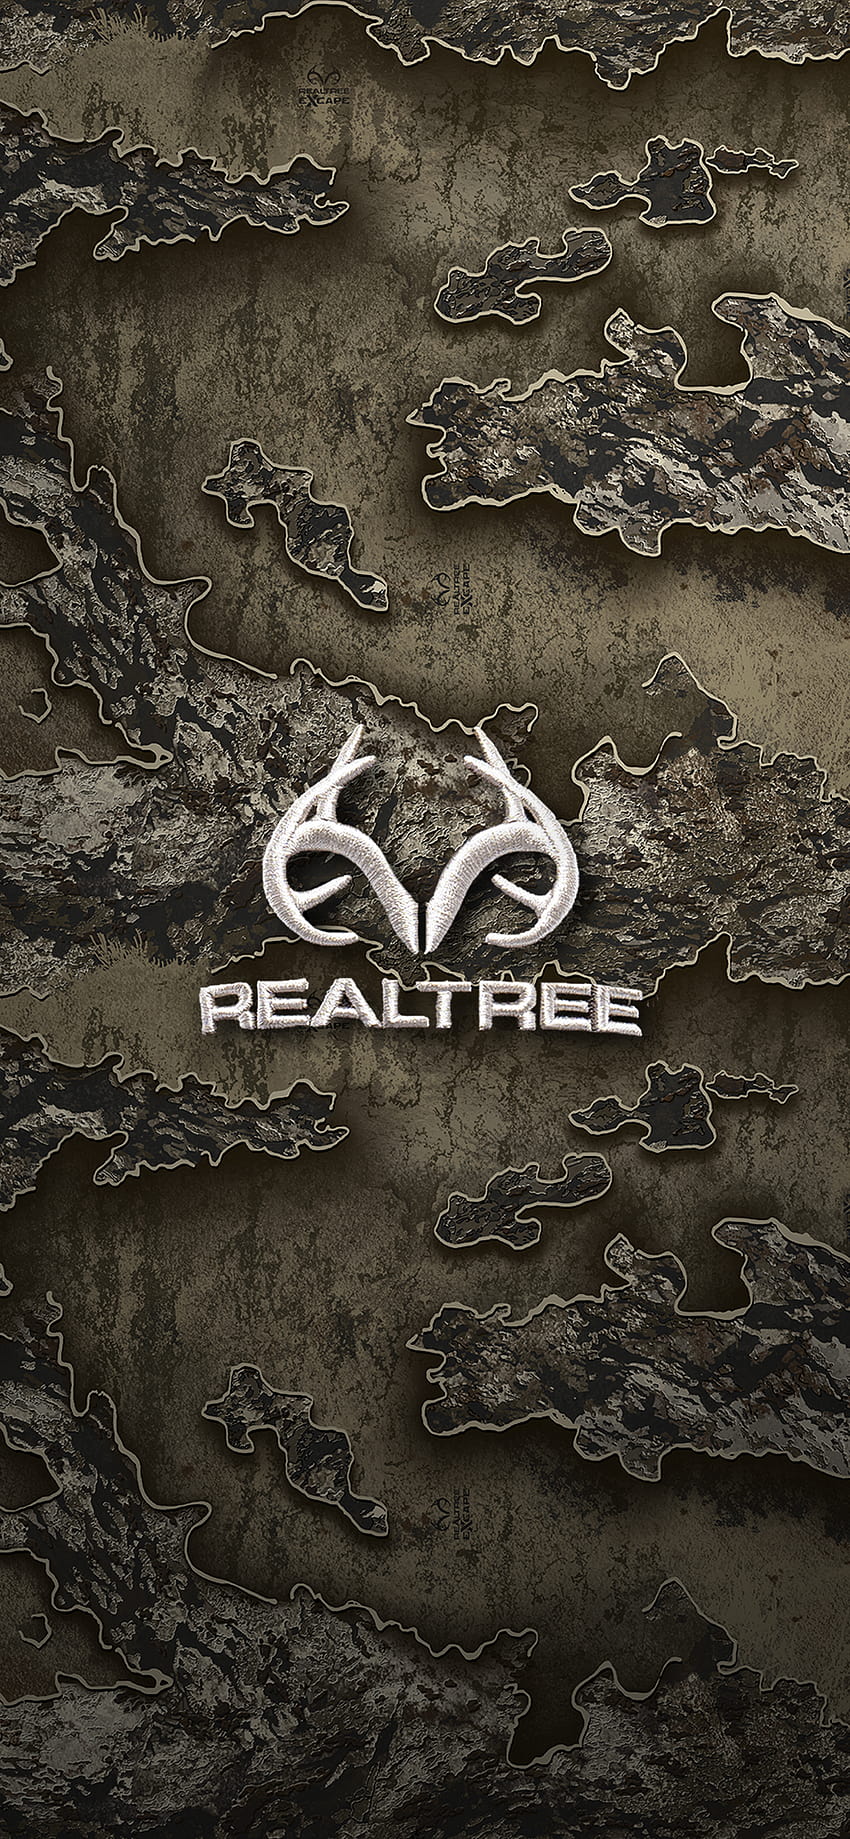 Realtree is my favorite brand of camo that I use  Realtree wallpaper Camo  wallpaper Realtree camo wallpaper